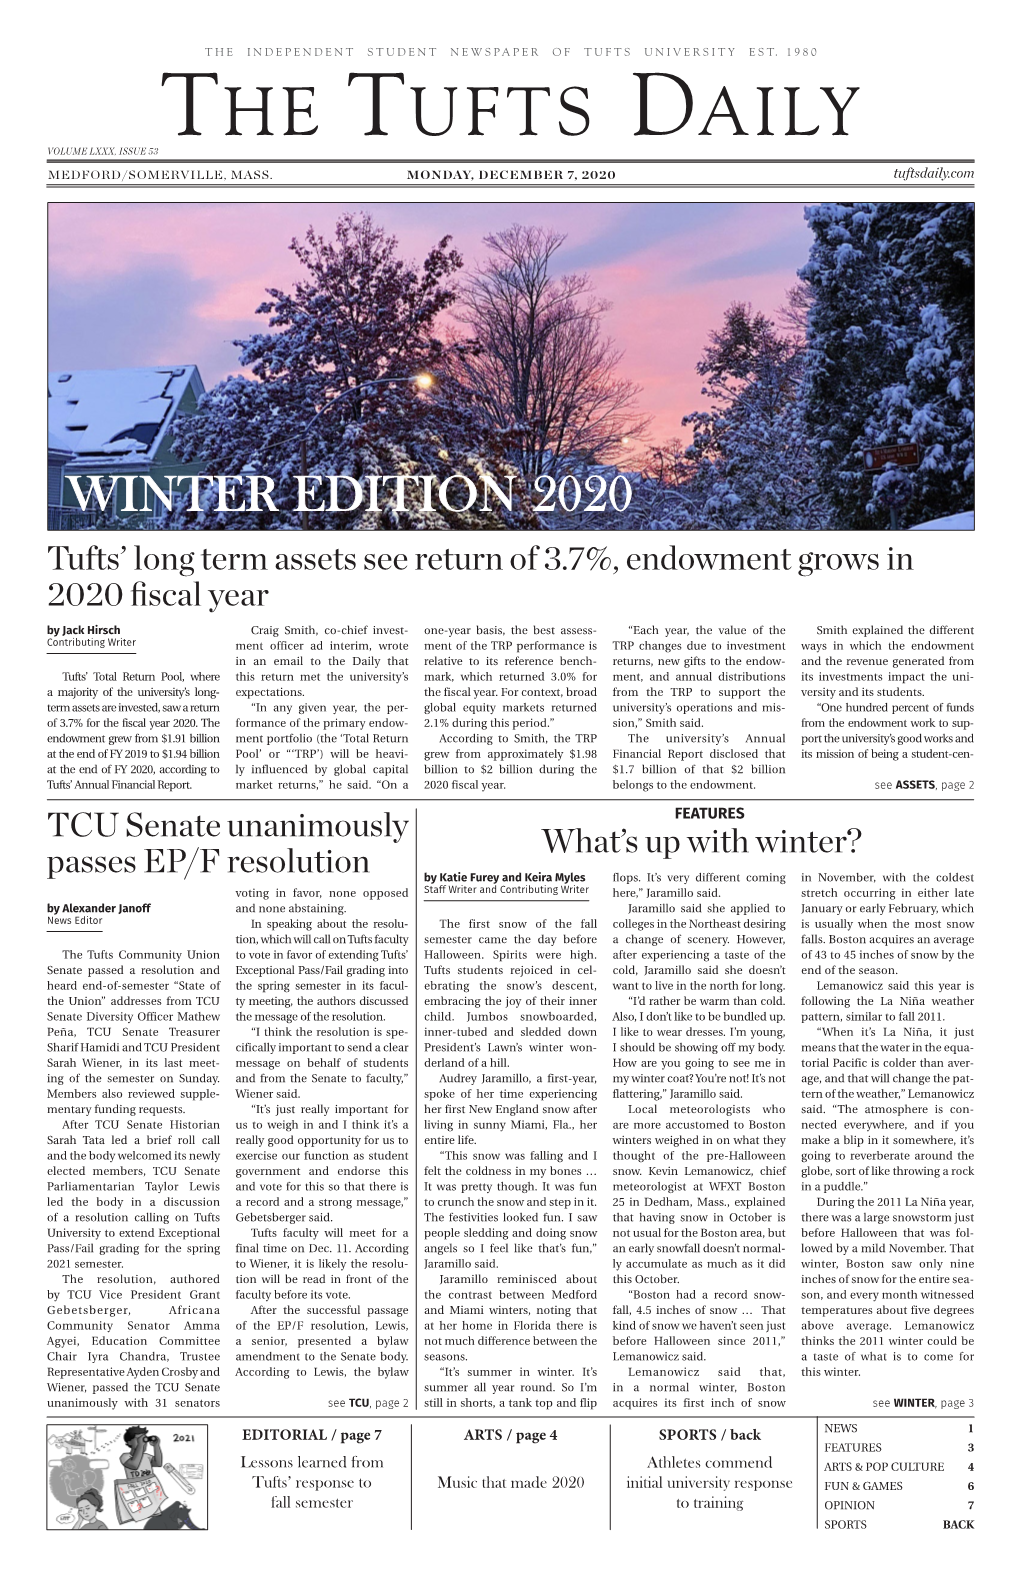 The Tufts Daily Volume Lxxx, Issue 53